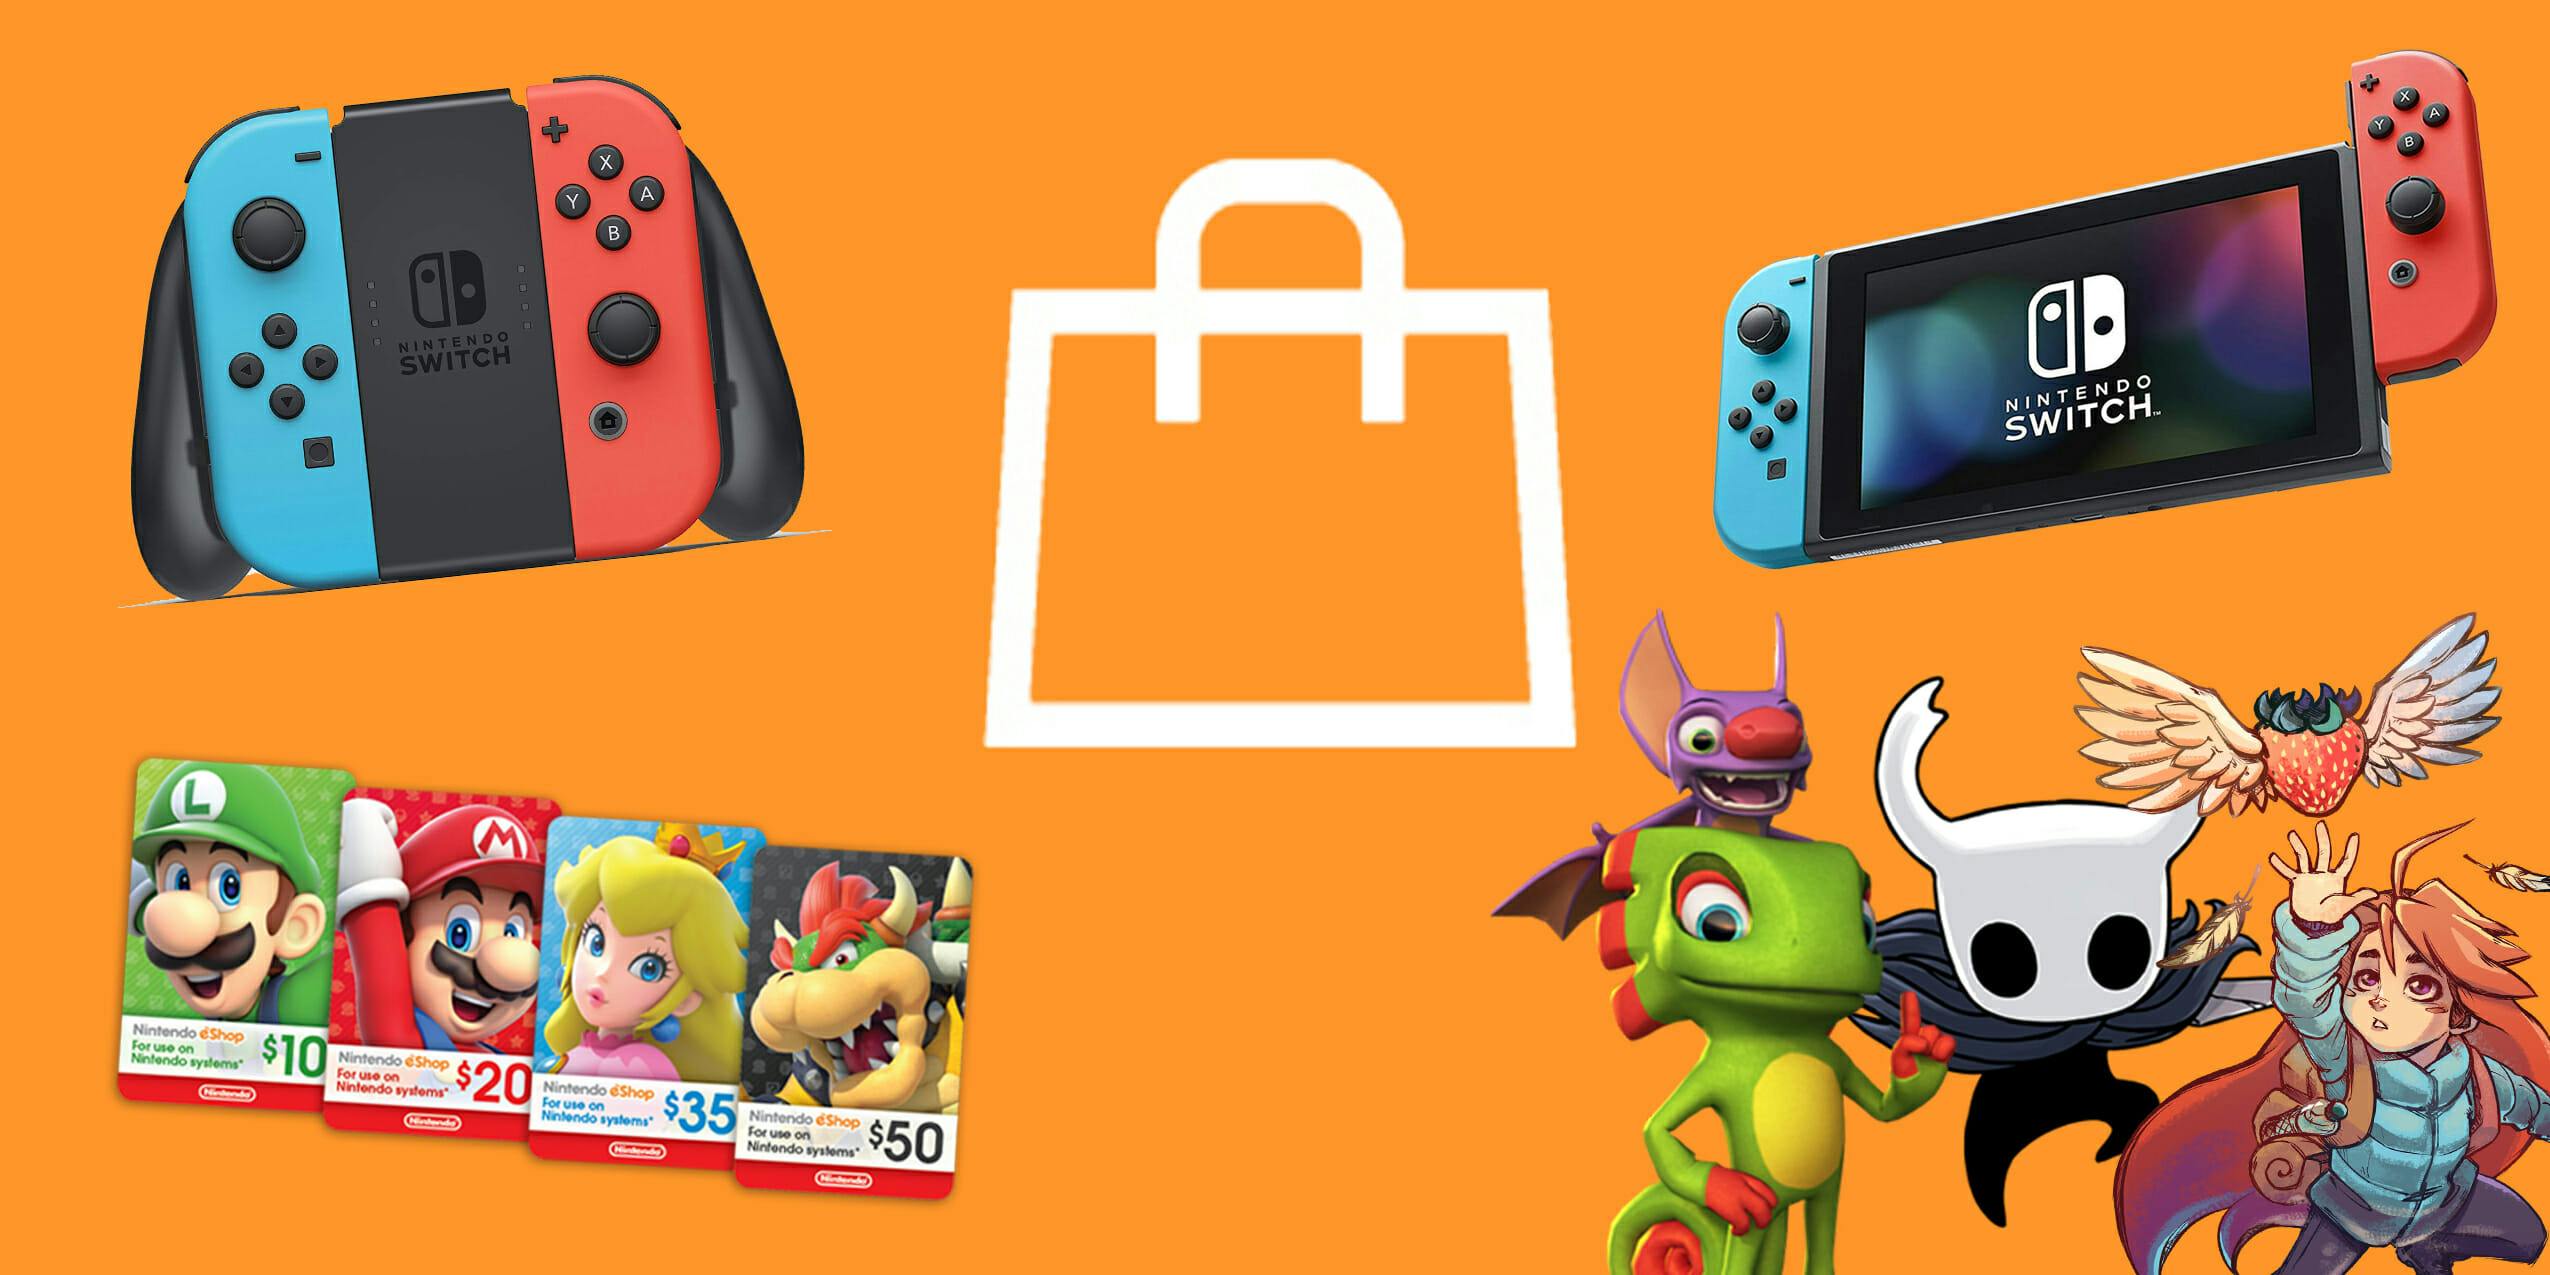 Nintendo Switch eShop: 10 Essential Games and Accessories to Buy